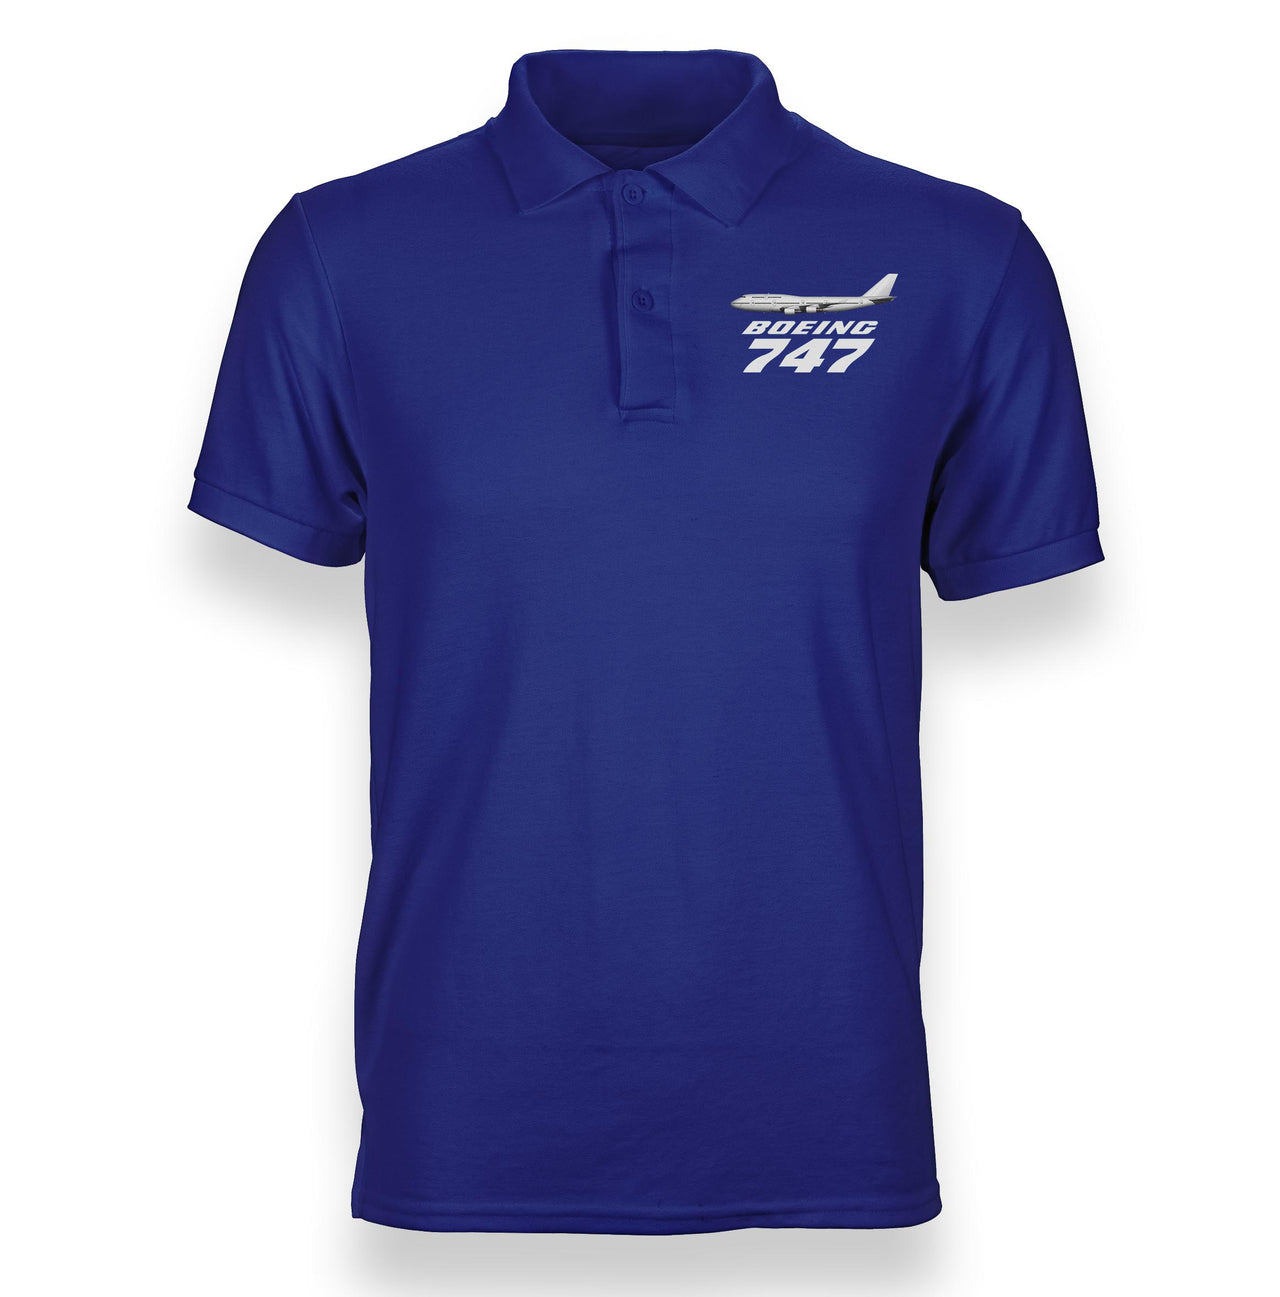 The Boeing 747 Designed Polo T-Shirts